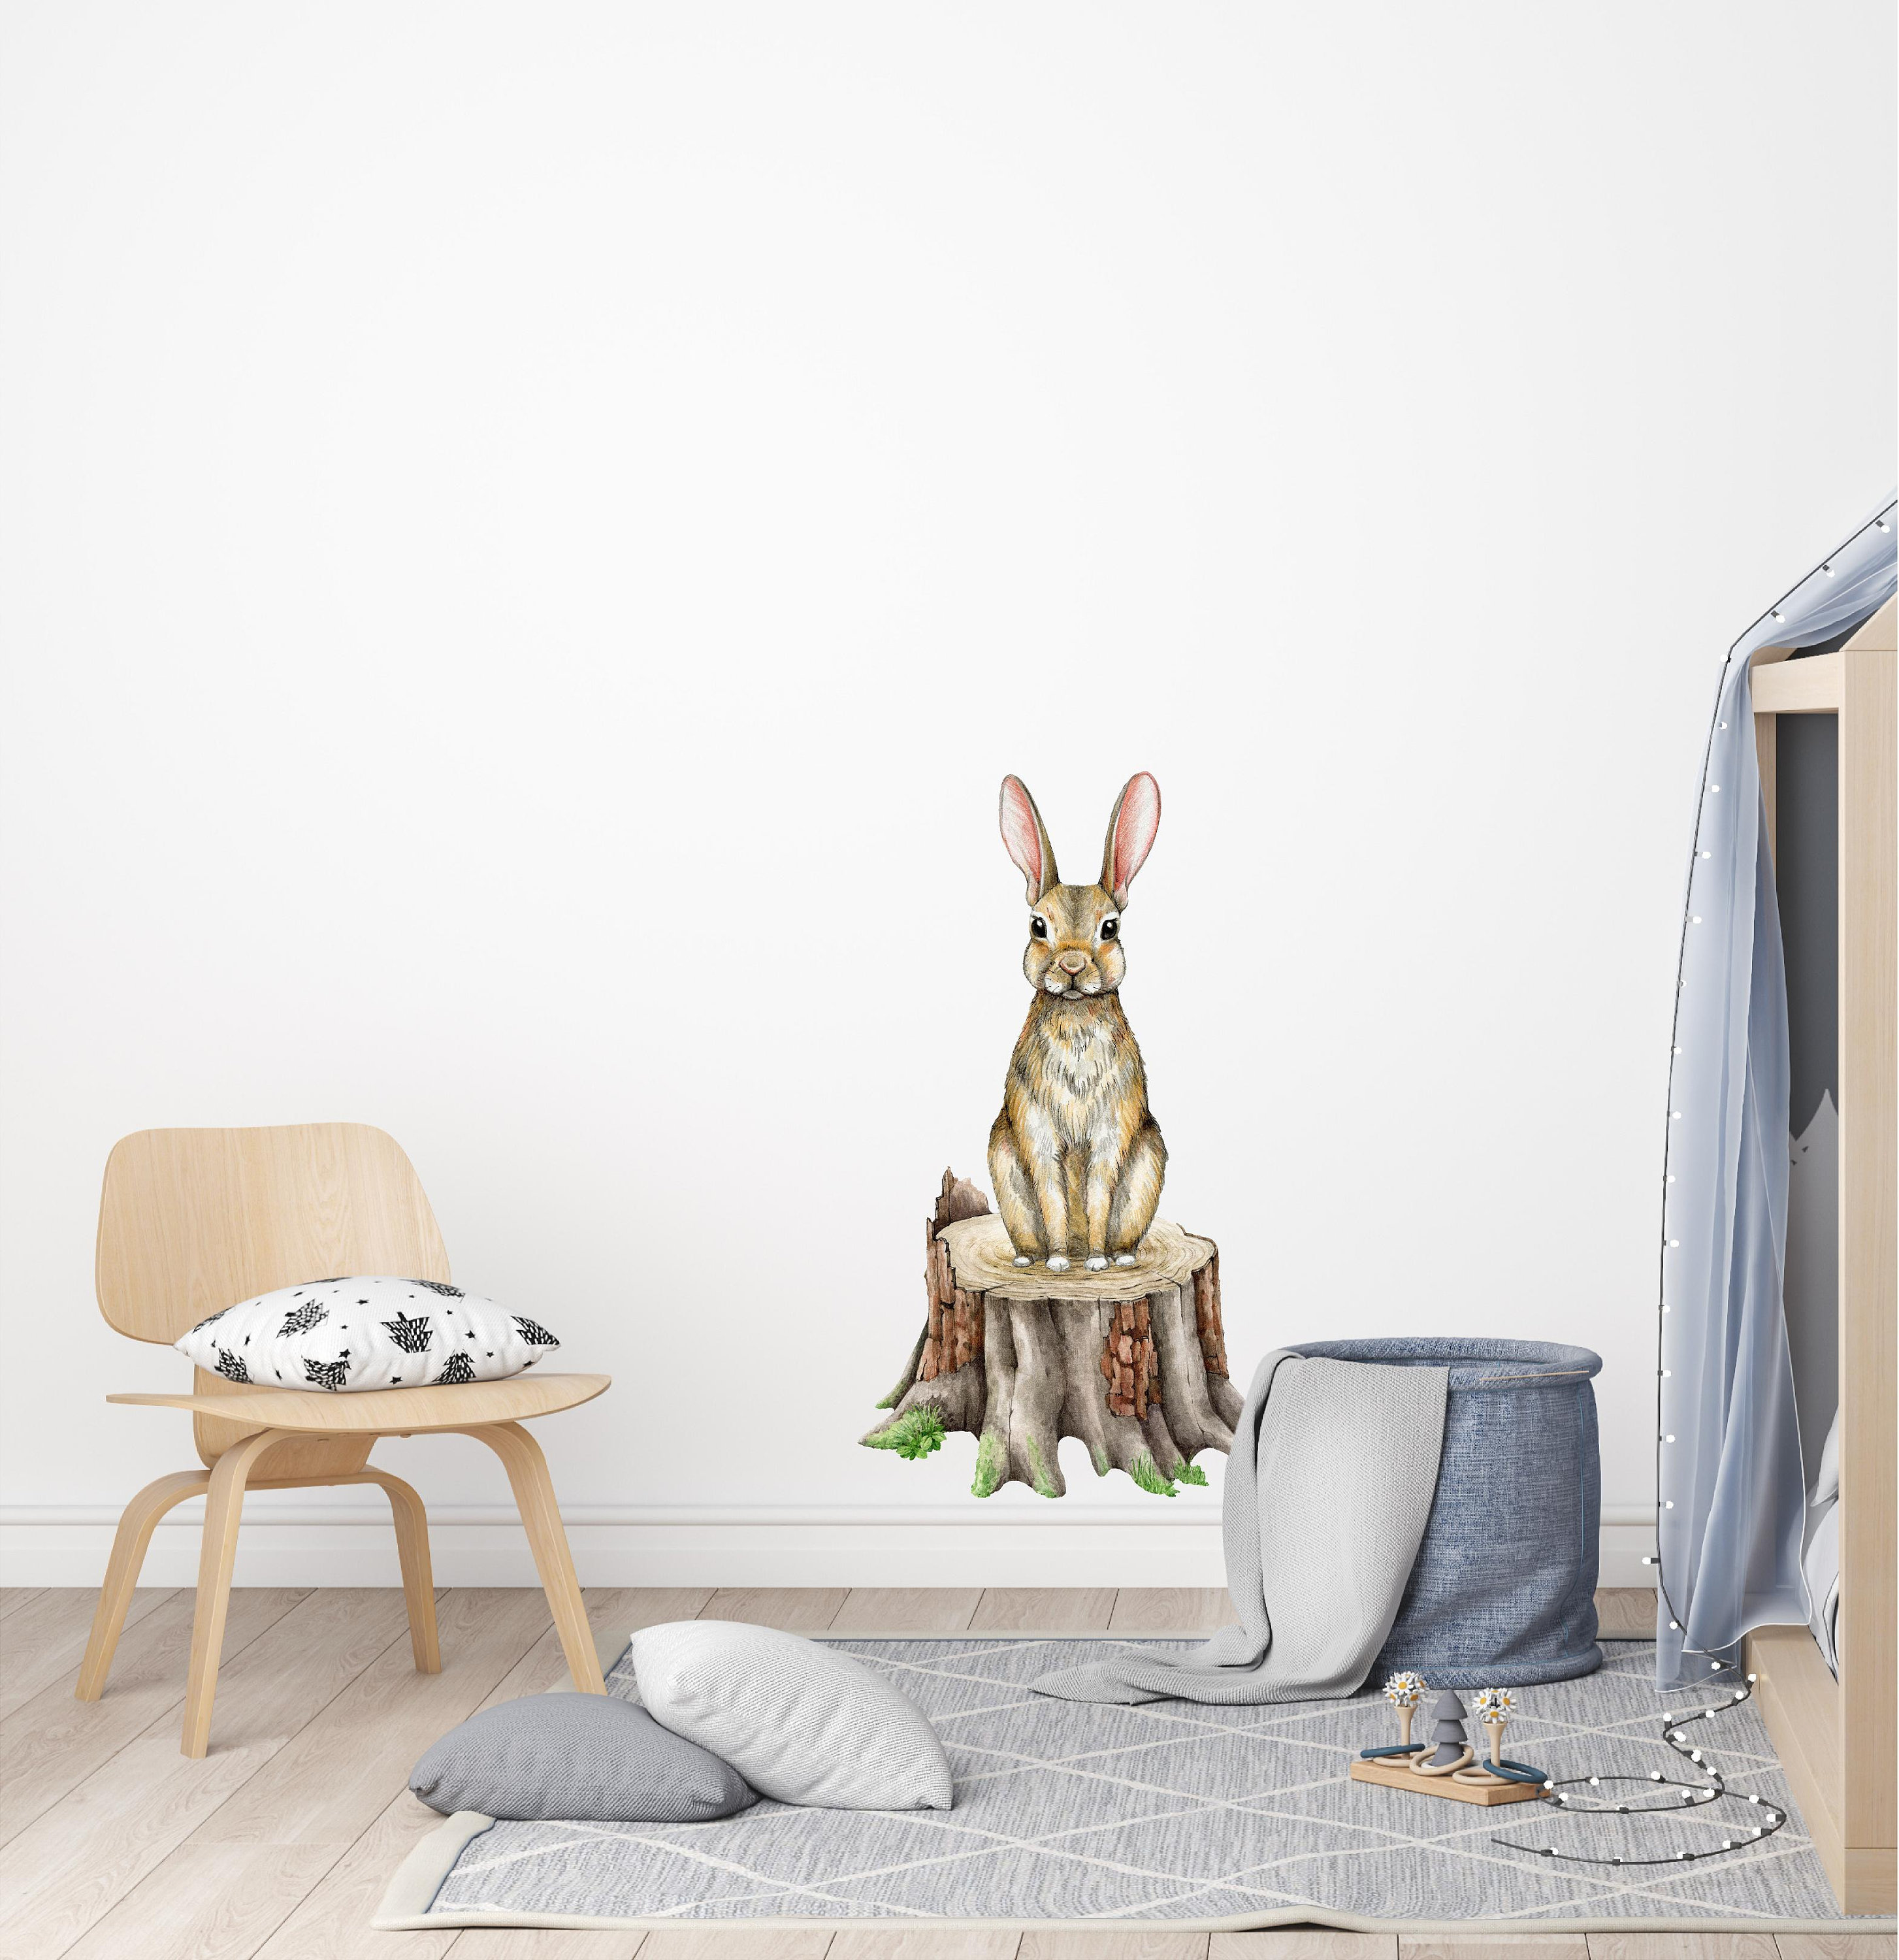 Patterned Rabbit Wall Decals fabric Stickers, Not Vinyl 